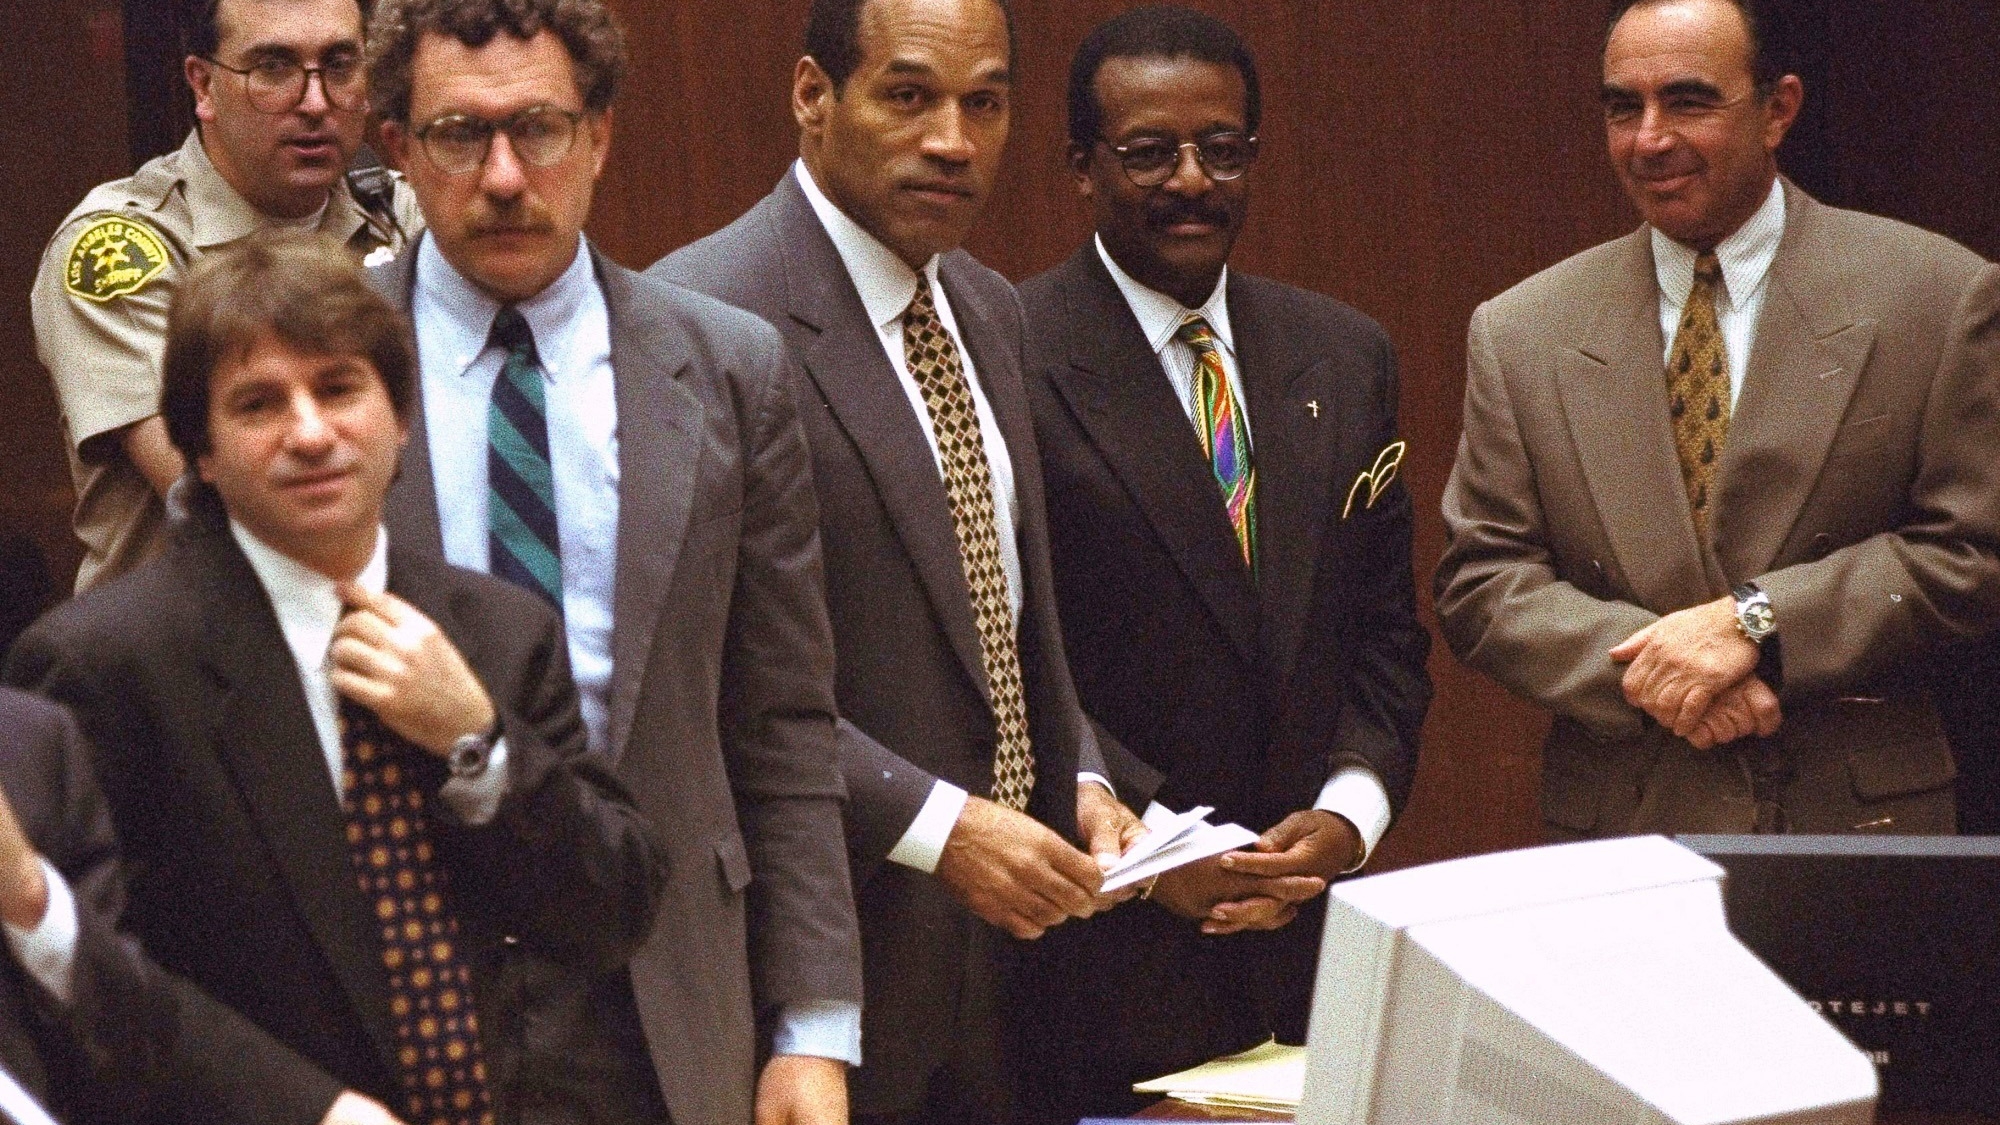 FILE -  Defendant O.J. Simpson and members of his defense team react as the jury, many wearing white T-shirts sporting a slogan from a local pizza chain, walk into the courtroom in Los Angeles Friday, May 5, 1995. From left to right are" Barry Scheck, Peter Neufeld, O.J. Simpson, Johnnie Cochran Jr., and Robert Shapiro. Background is Deputy Guy Magnera. Simpson, the decorated football superstar and Hollywood actor who was acquitted of charges he killed his former wife and her friend but later found liable in a separate civil trial, has died. He was 76. (AP Photo/Reed Saxon, Pool, File)